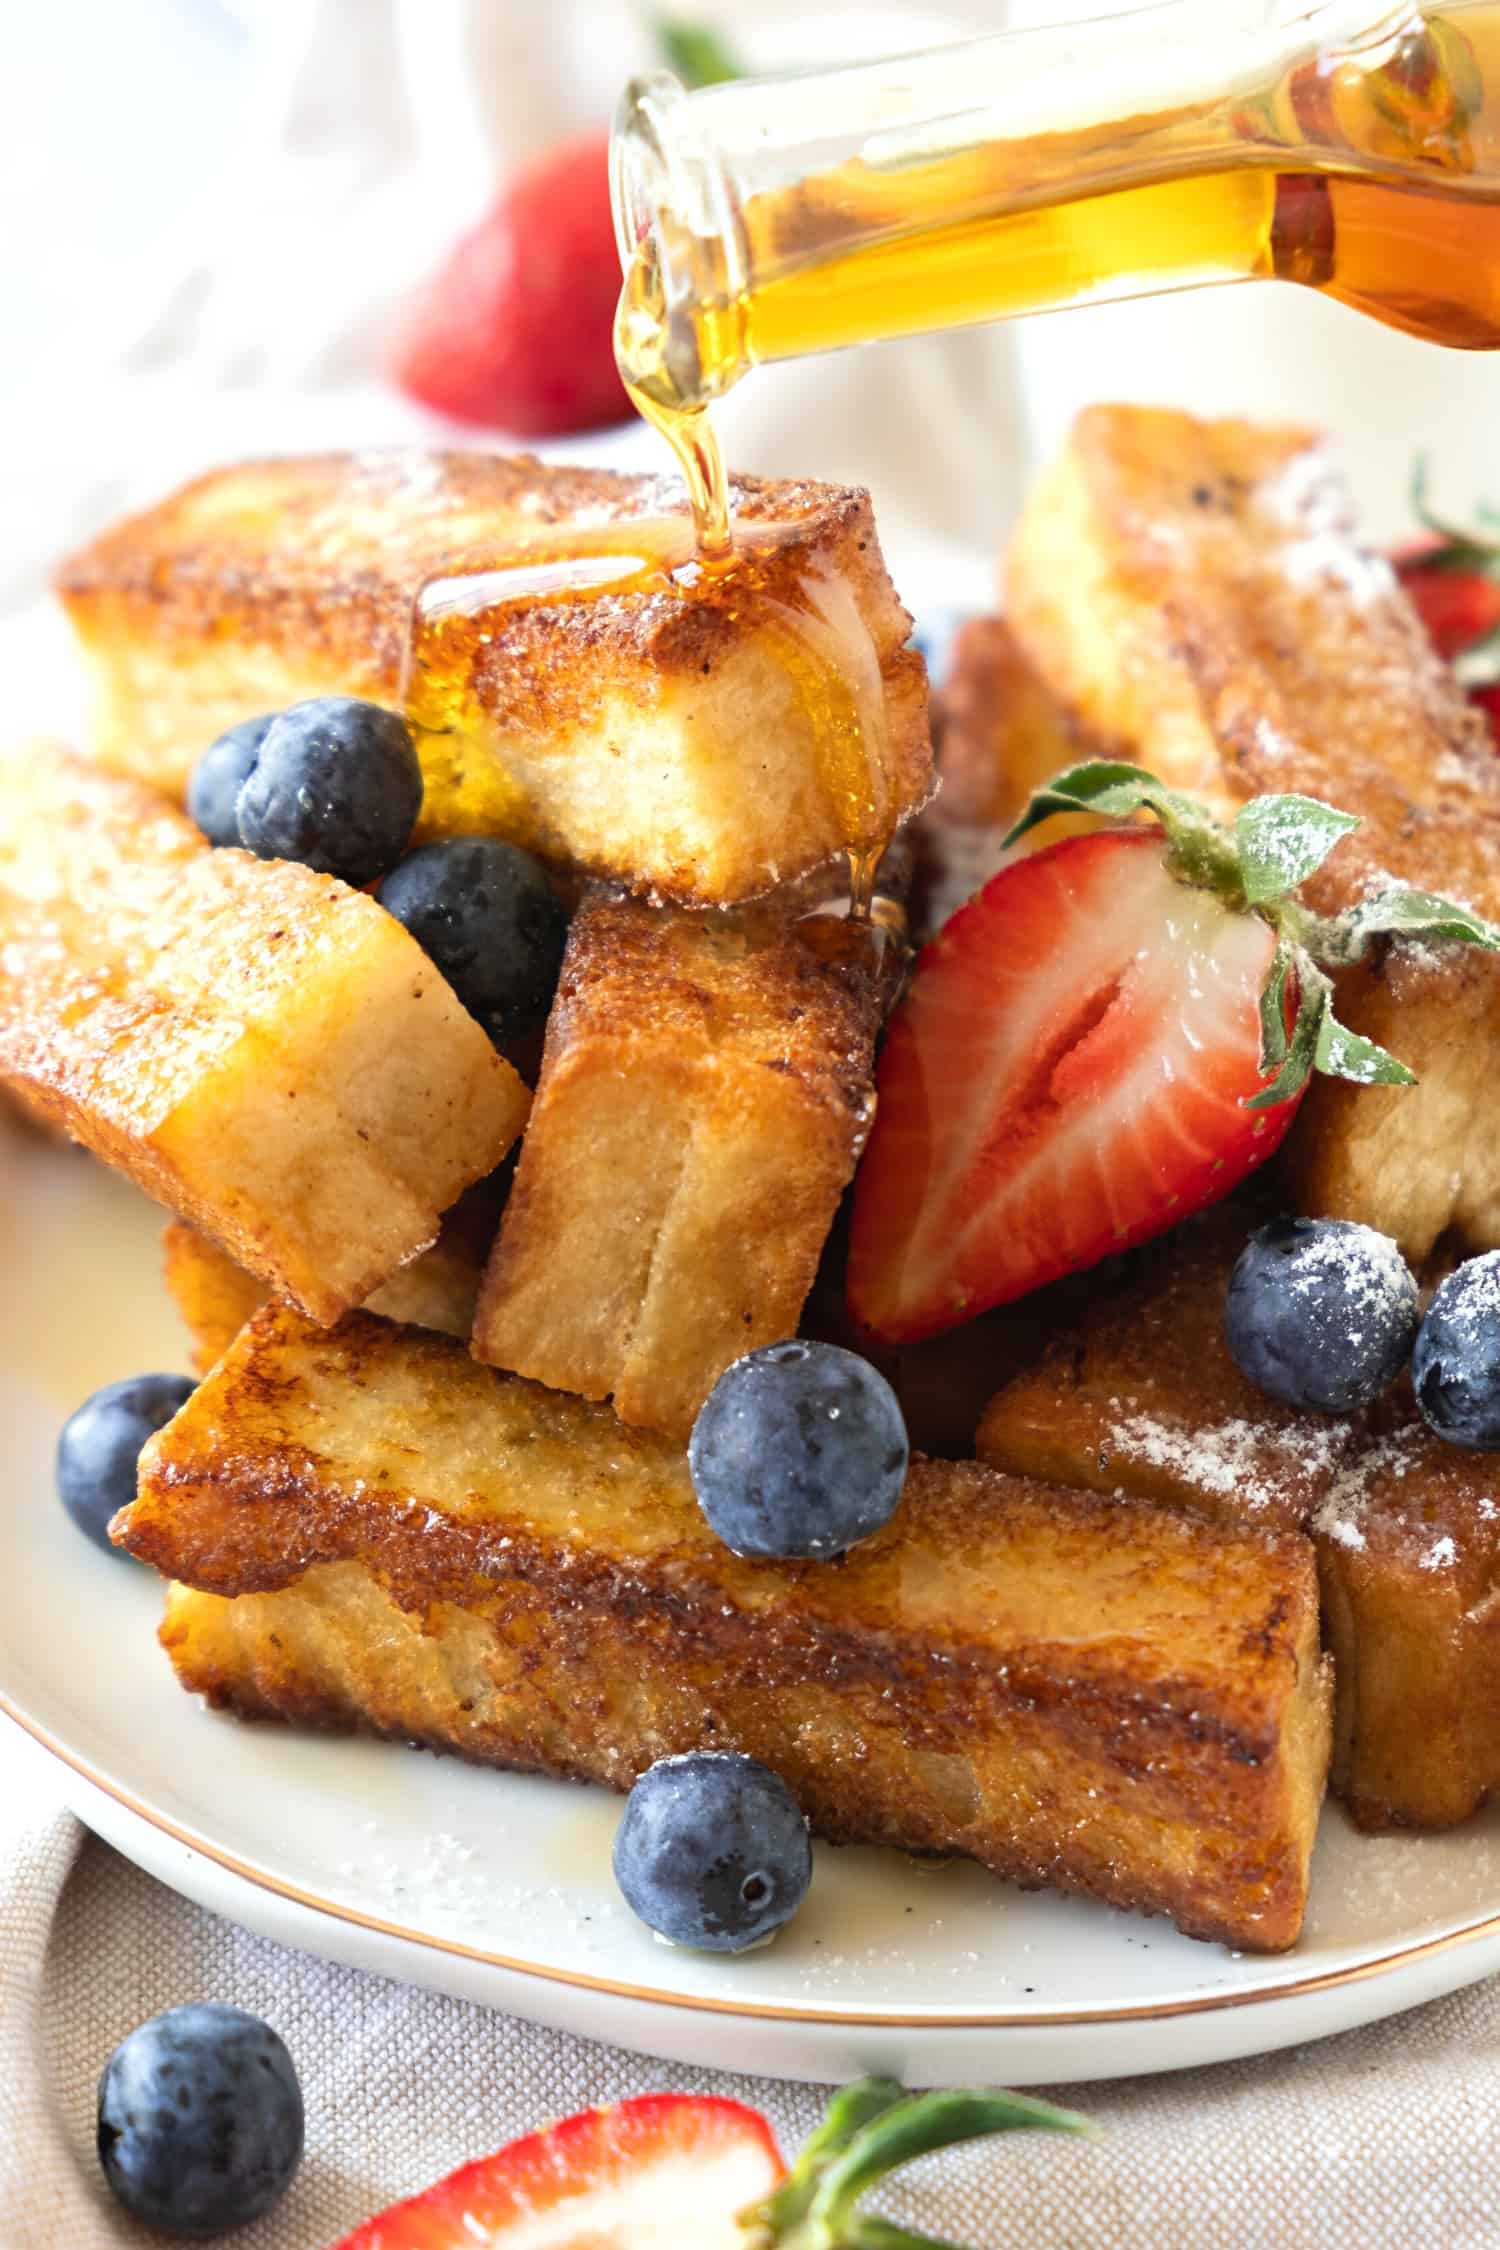 Pouring maple syrup over a plate of fresh berries and French toast sticks.